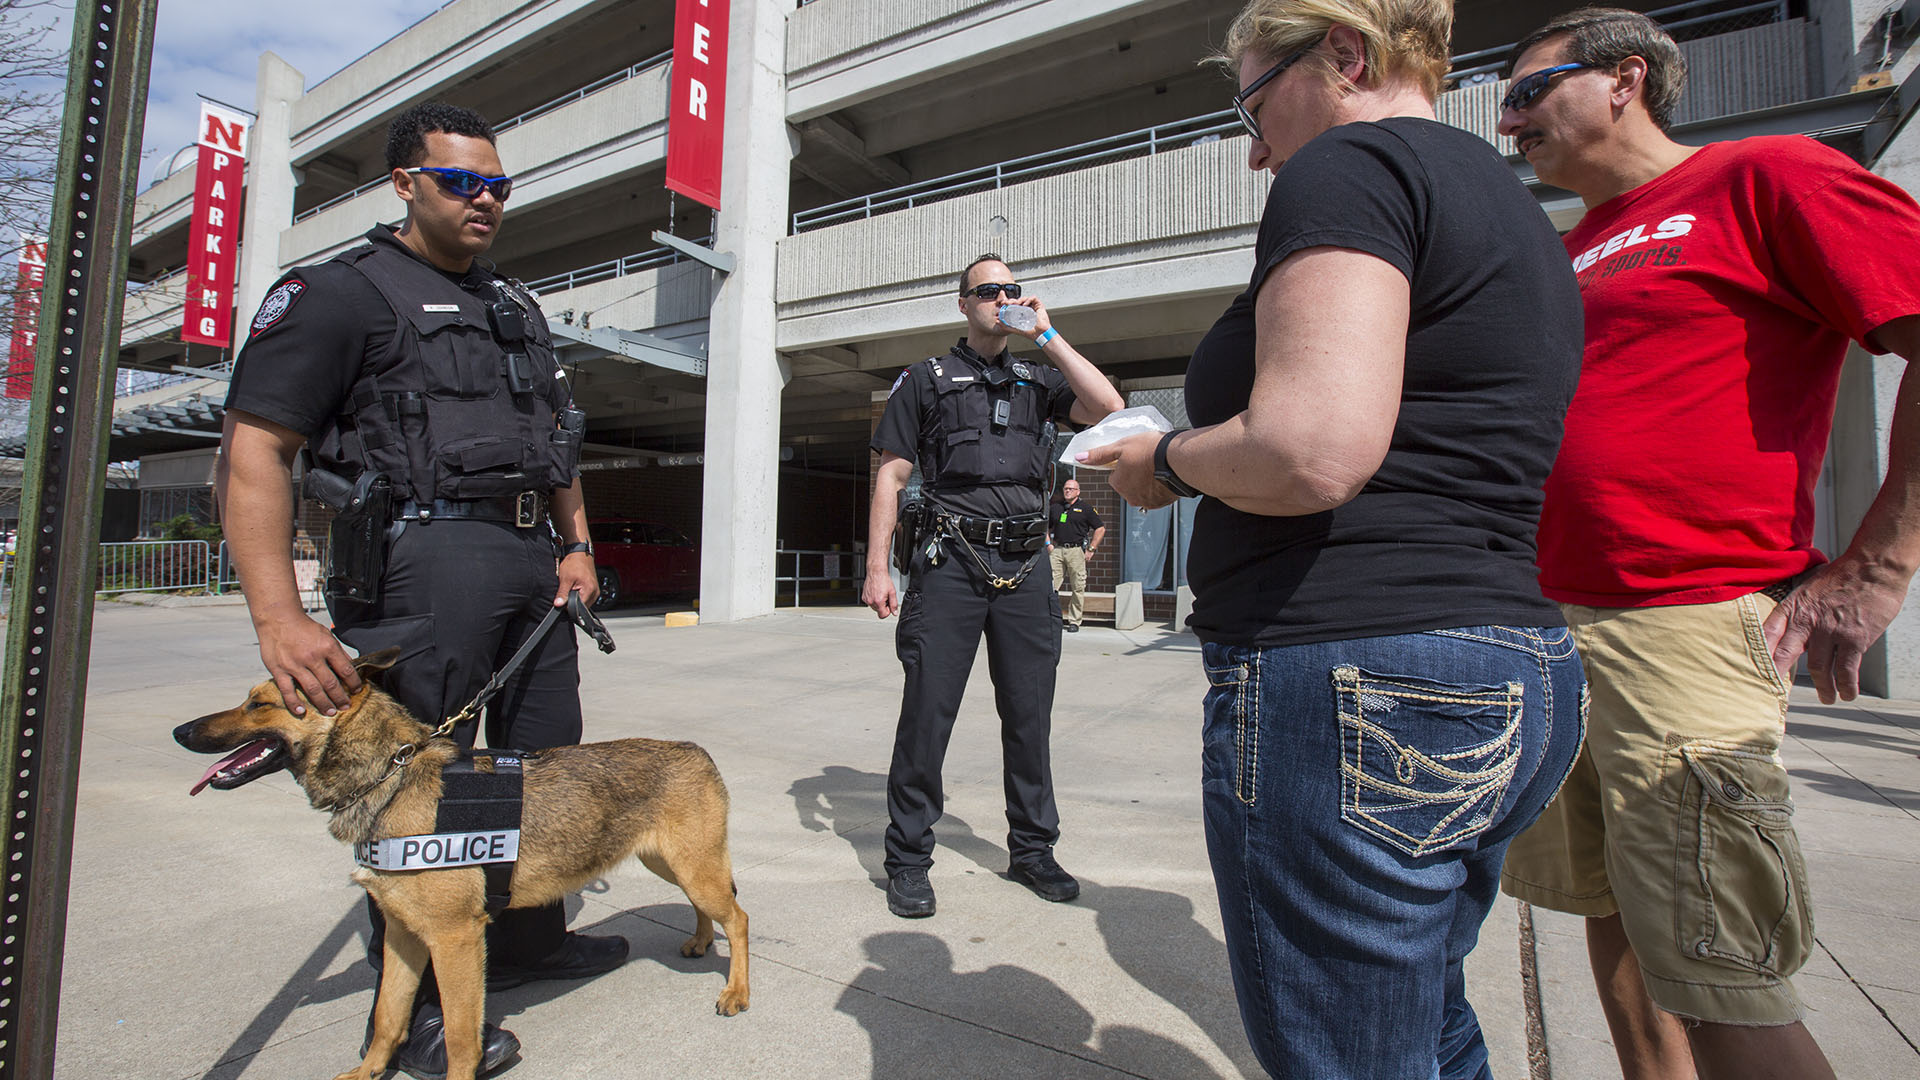 Nebraska K-9 officers Russell Johnson Jr. (left) and Greg Byelick talk with Husker fans prior to the Husker football spring game on April 15. The University Police Department has launched a new effort to expand outreach to the campus community.